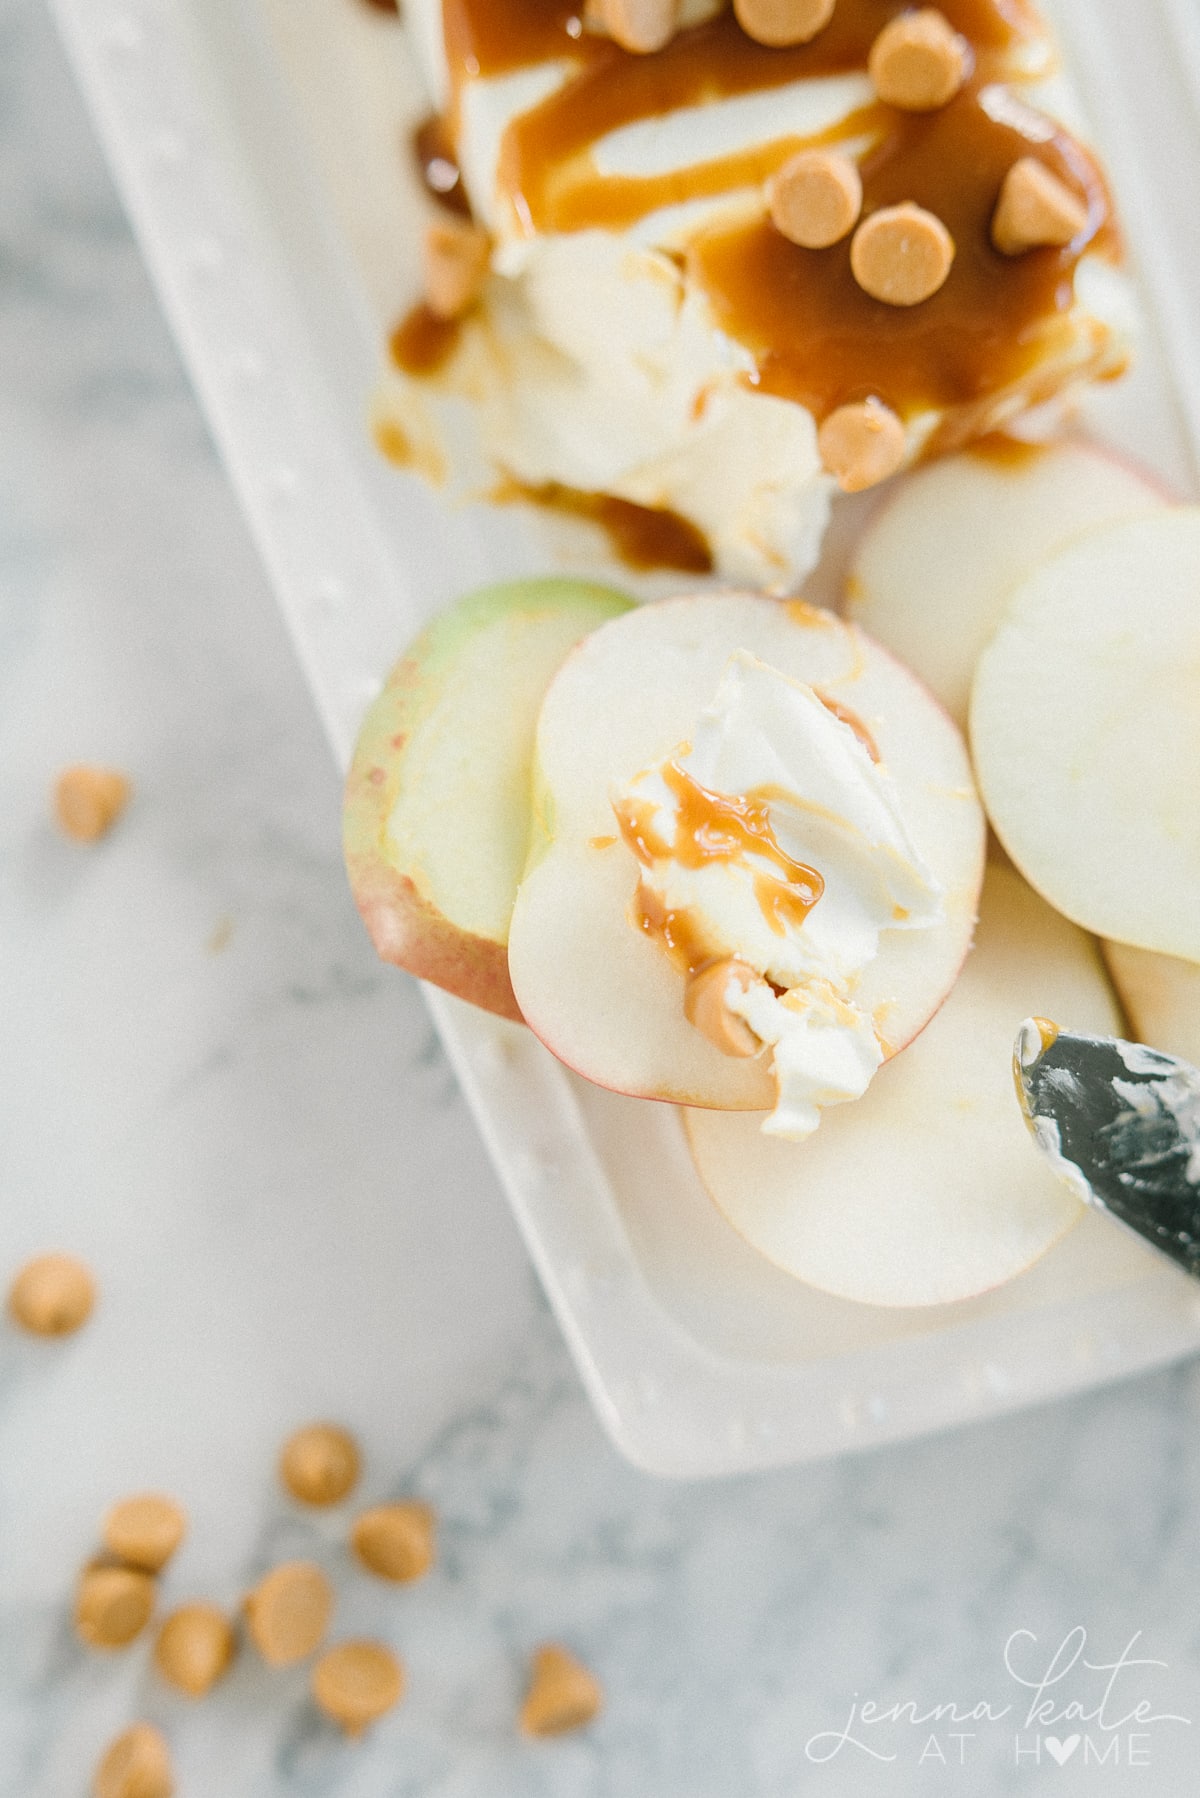 Apples with cream cheese dip smeared on top